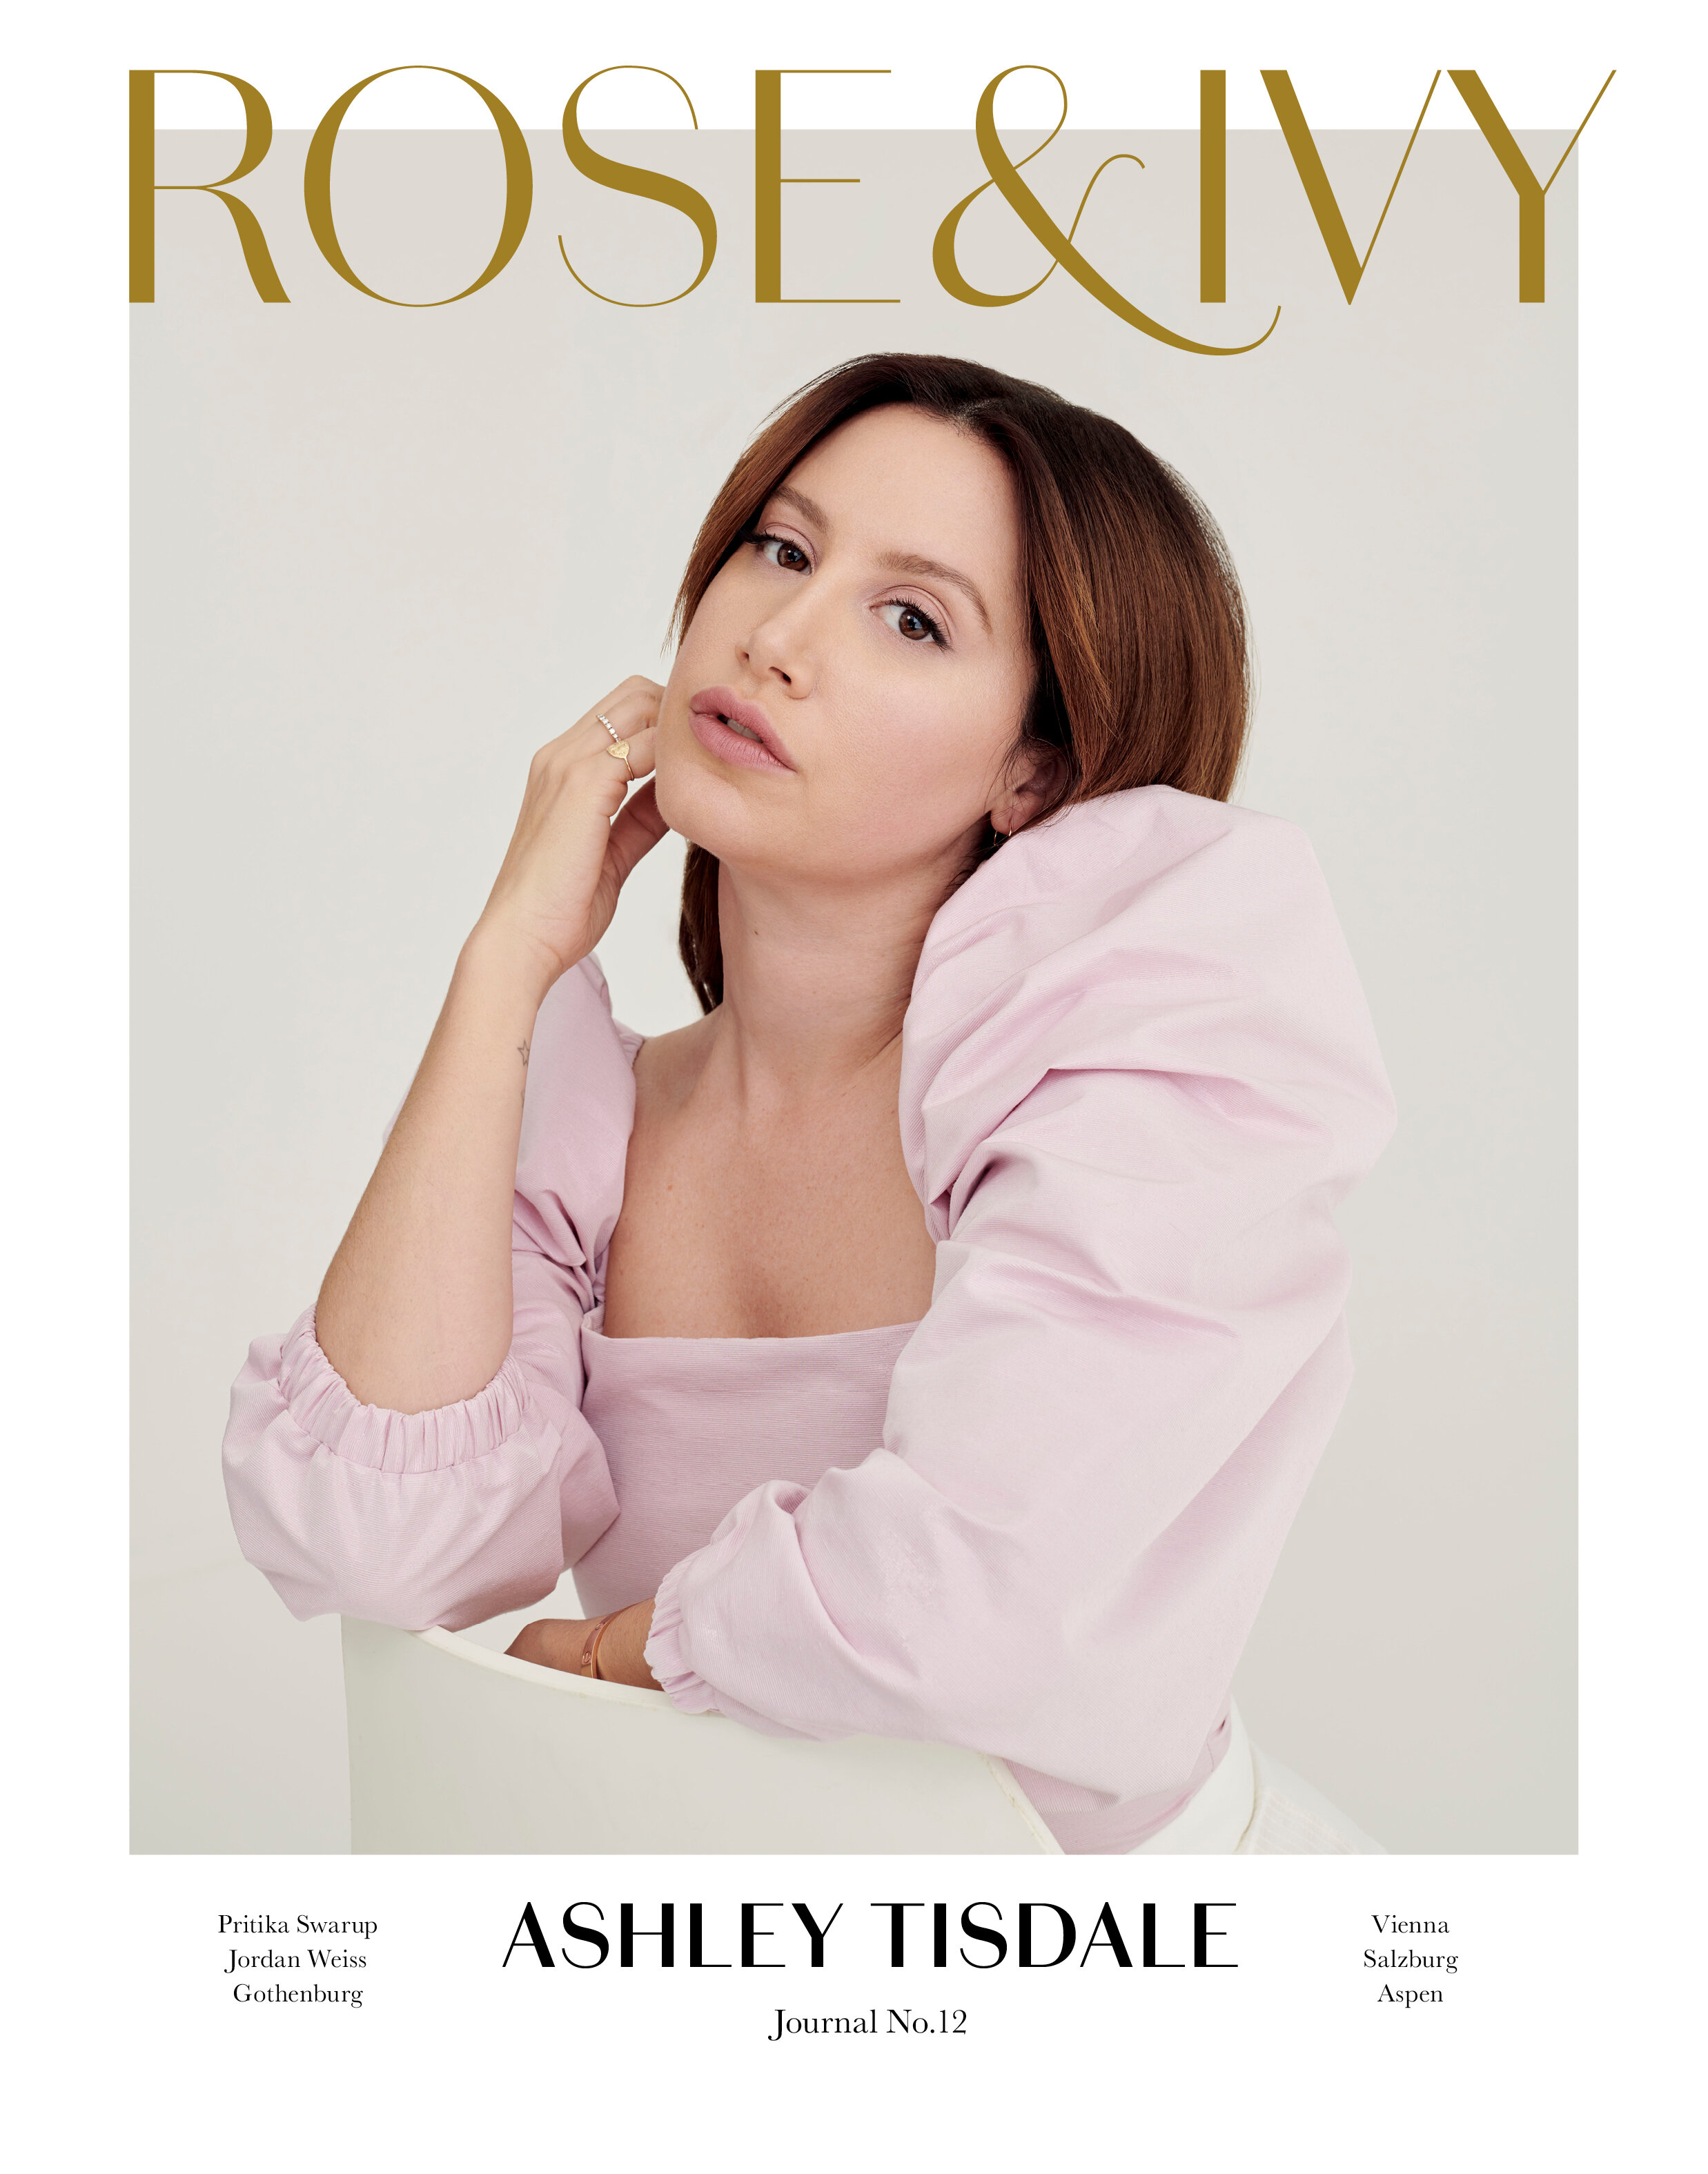 ROSE & IVY Journal No.12 Cover Ashley Tisdale.jpg